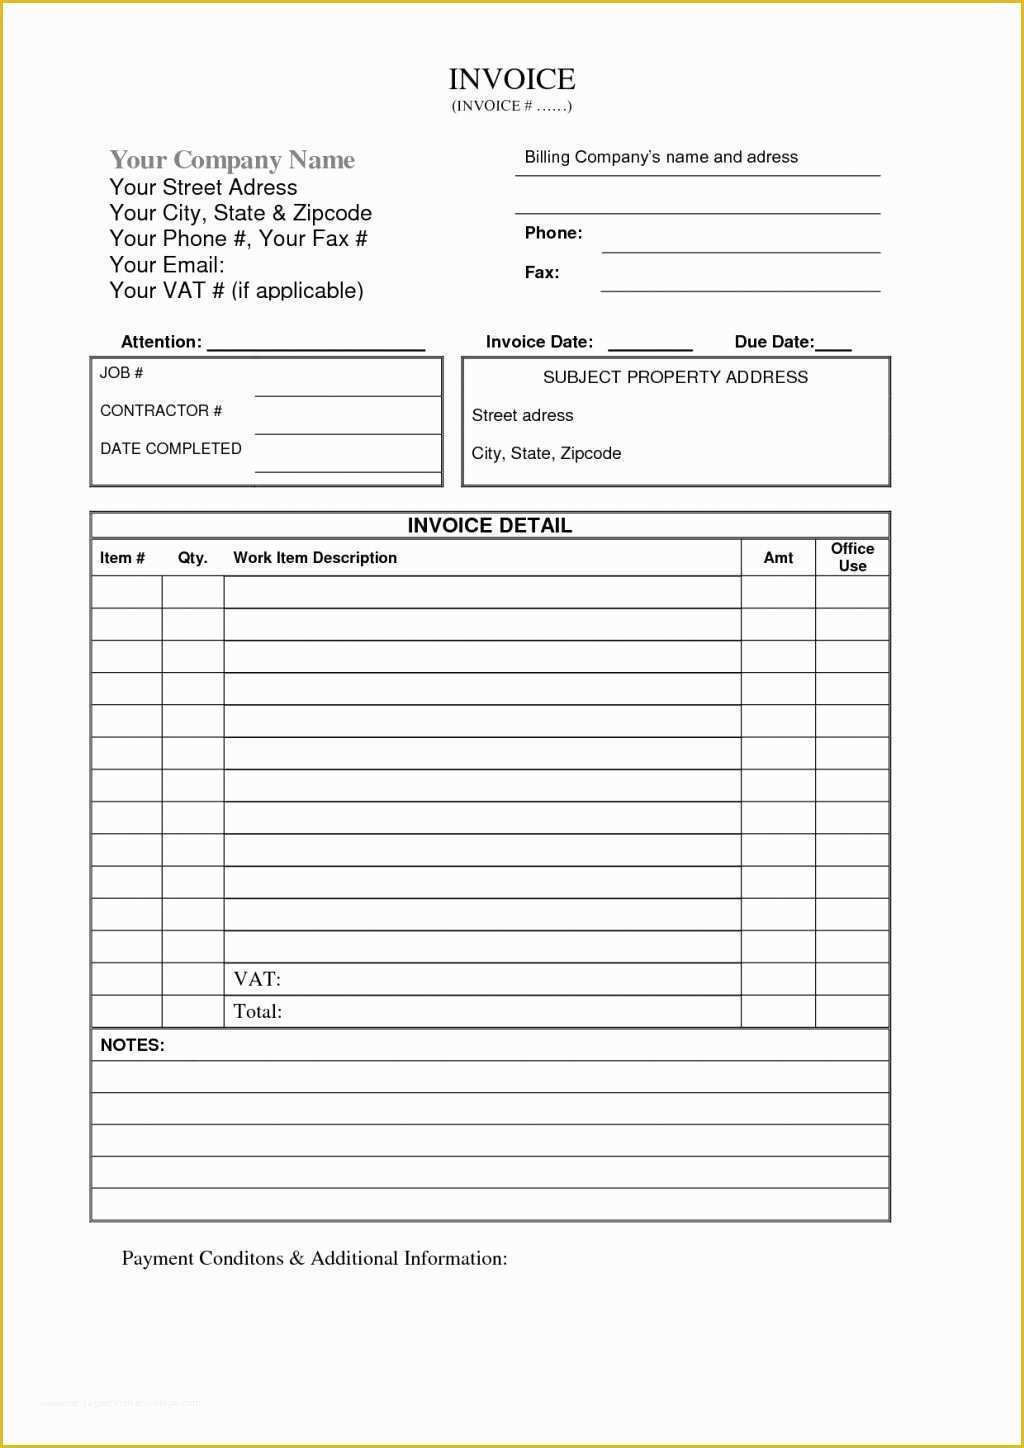 1099 Invoice Template Free Of 1099 Contractor Invoice Template Independent Contractor